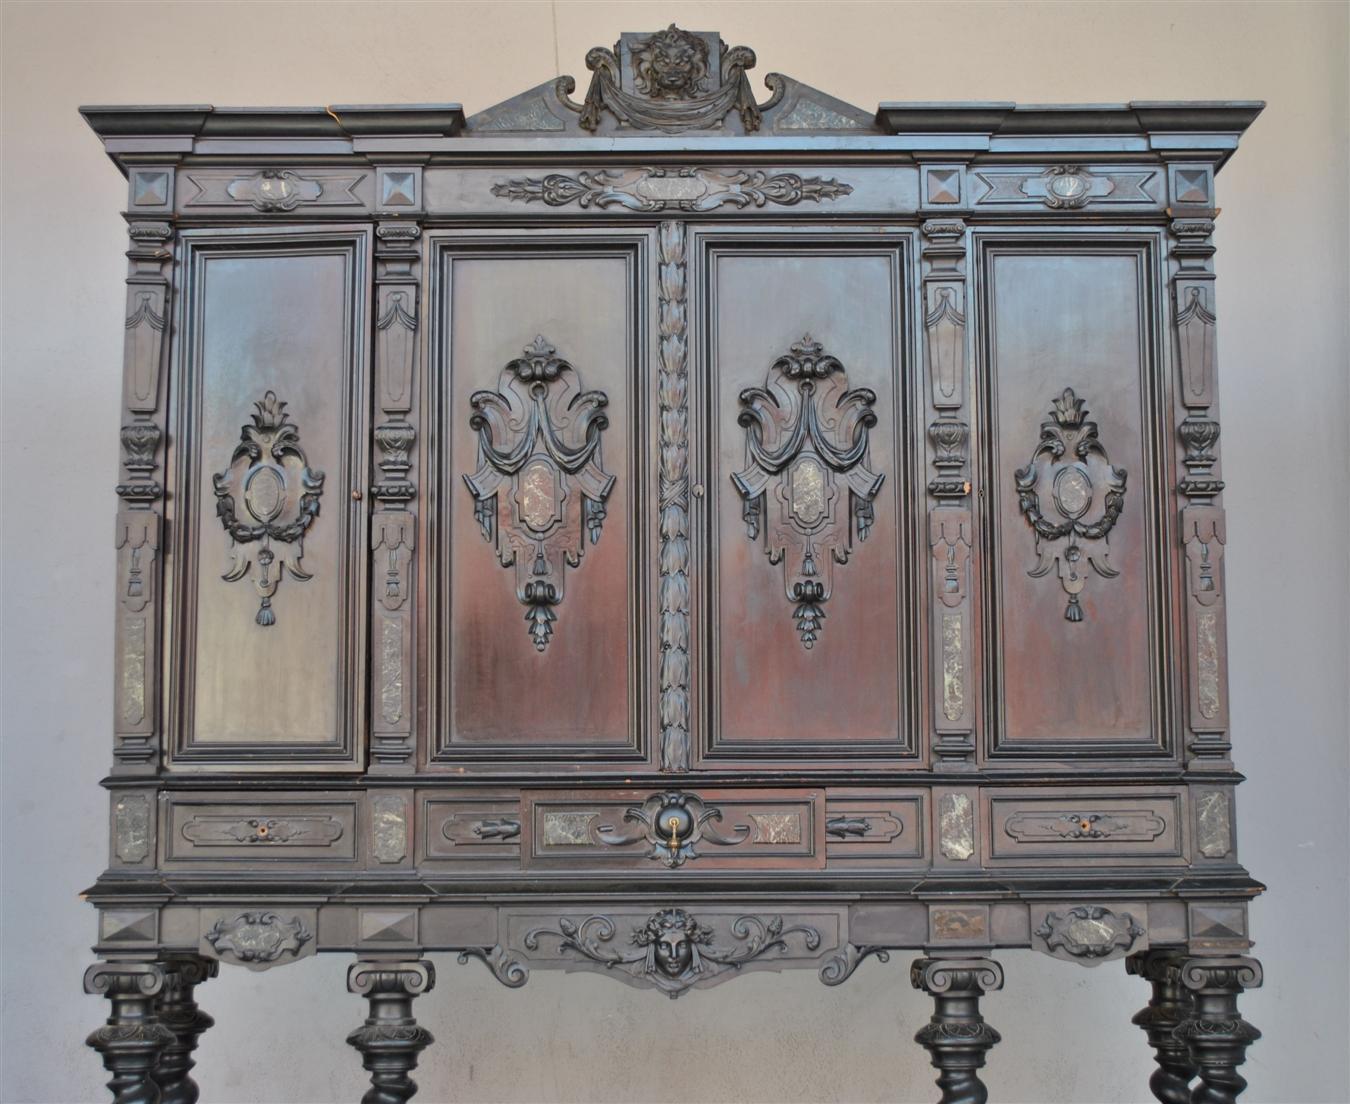 Chateau furniture: Important blackened wooden cabinet in Renaissance style with twisted columns. Richly carved. Decor with heads of women and lion. French cabinetmaker work, 19th century. Very good quality of production. Inlay in green marble